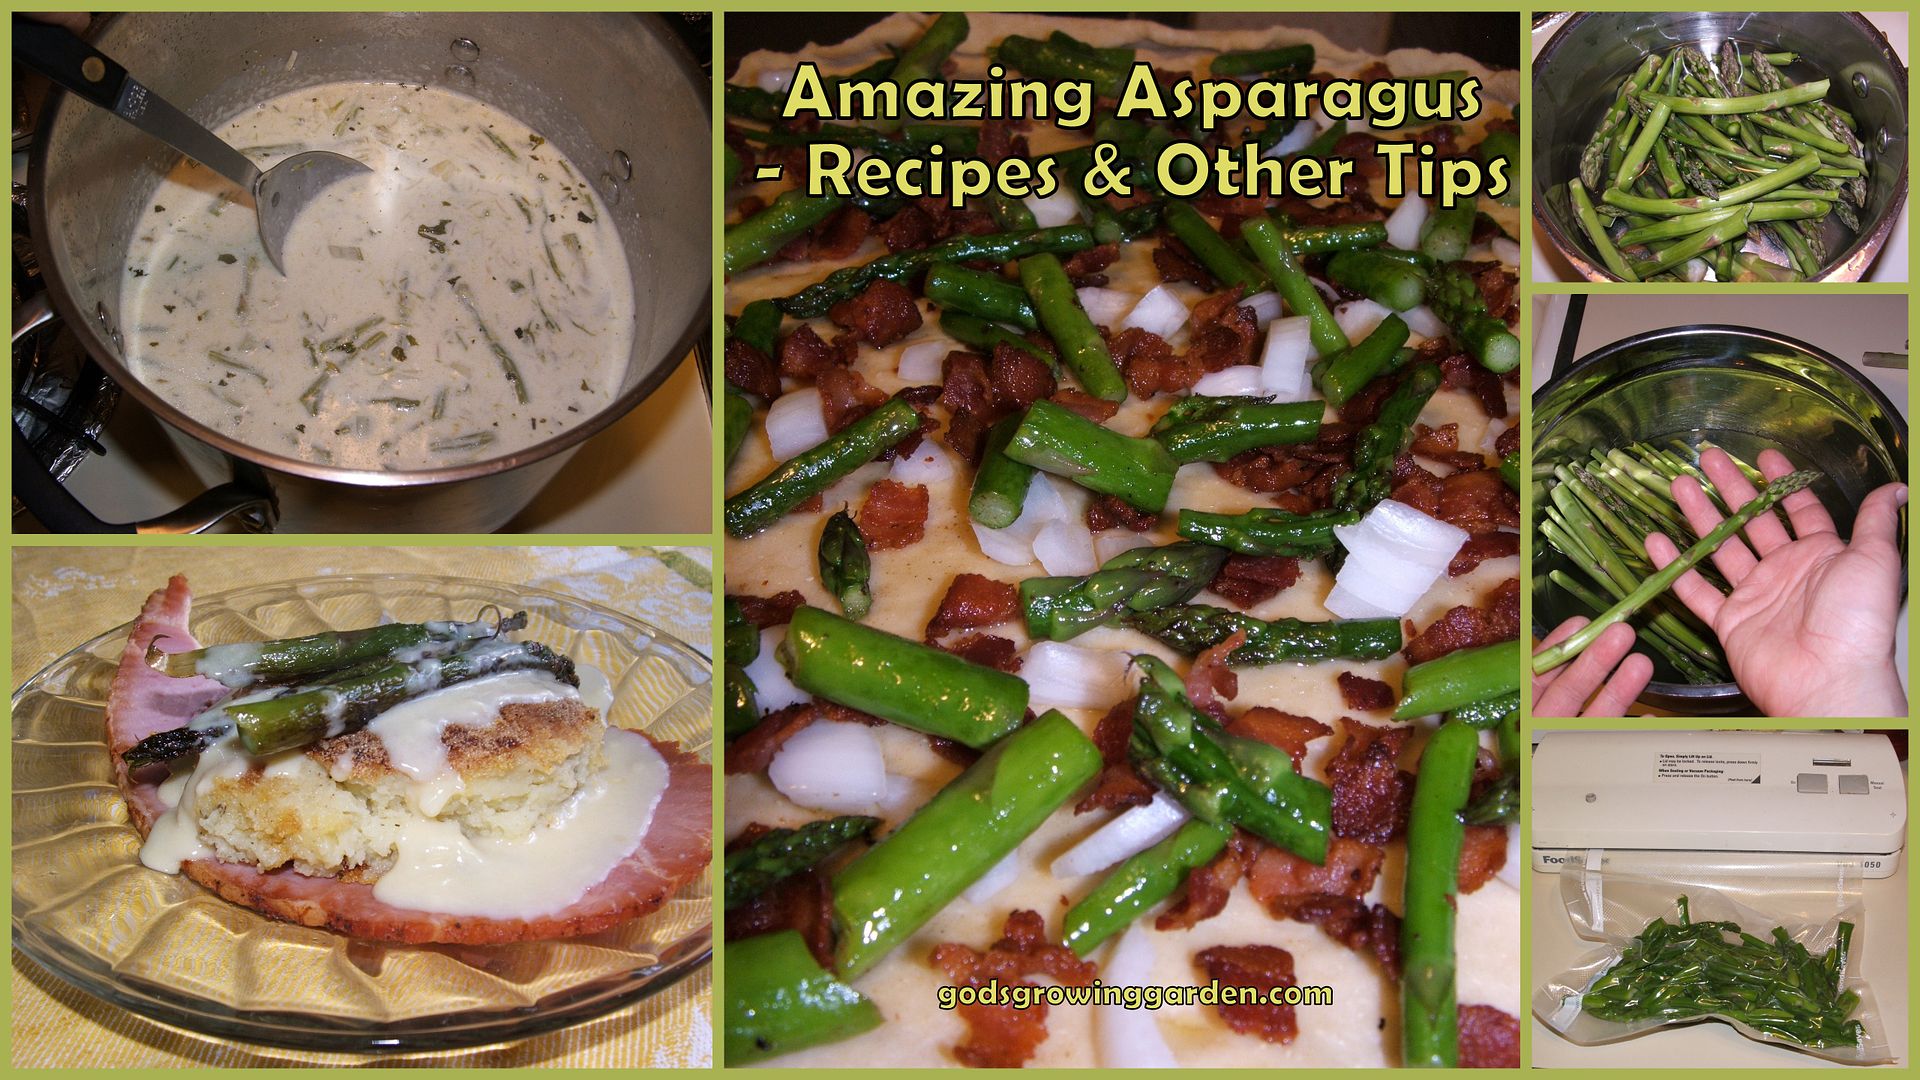 Amazing Asparagus by Angie Ouellette-Tower for godsgrowinggarden.com photo 2013-05-19_zps66a6cbd4.jpg